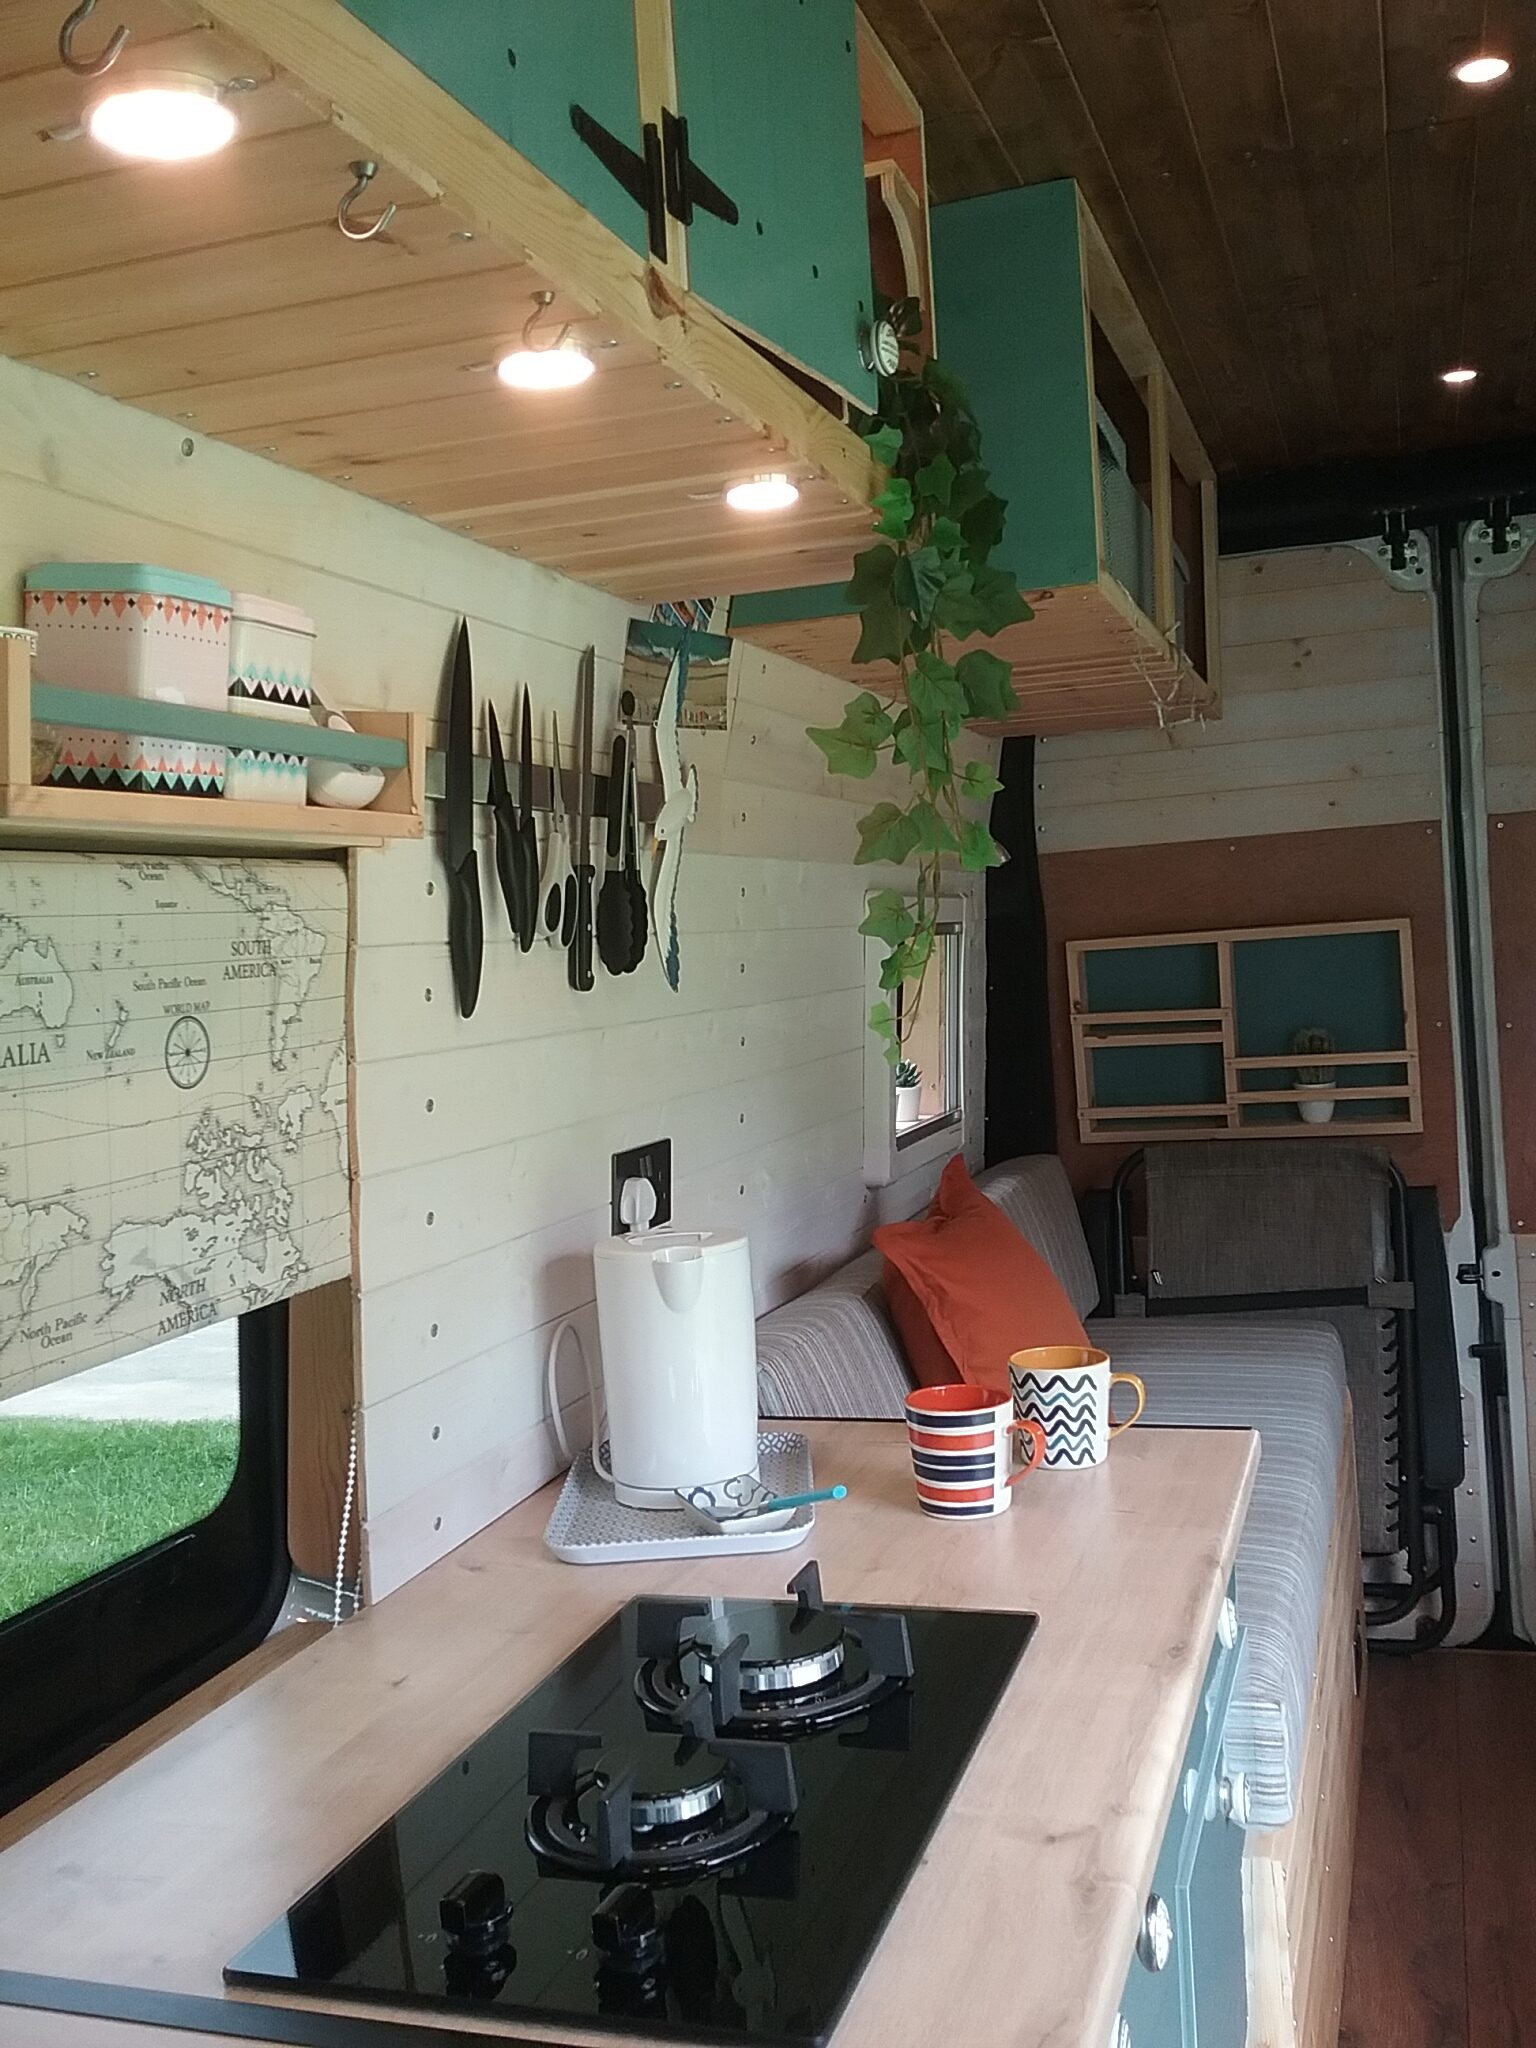 A cozy camper van interior with wooden paneling. It features a small kitchen area with a gas stove, kettle, and cutting board. Above, there are shelves with utensils and plants. The living space includes a cushioned bench with pillows and a map of Italy on the wall. Two mugs sit on the counter.